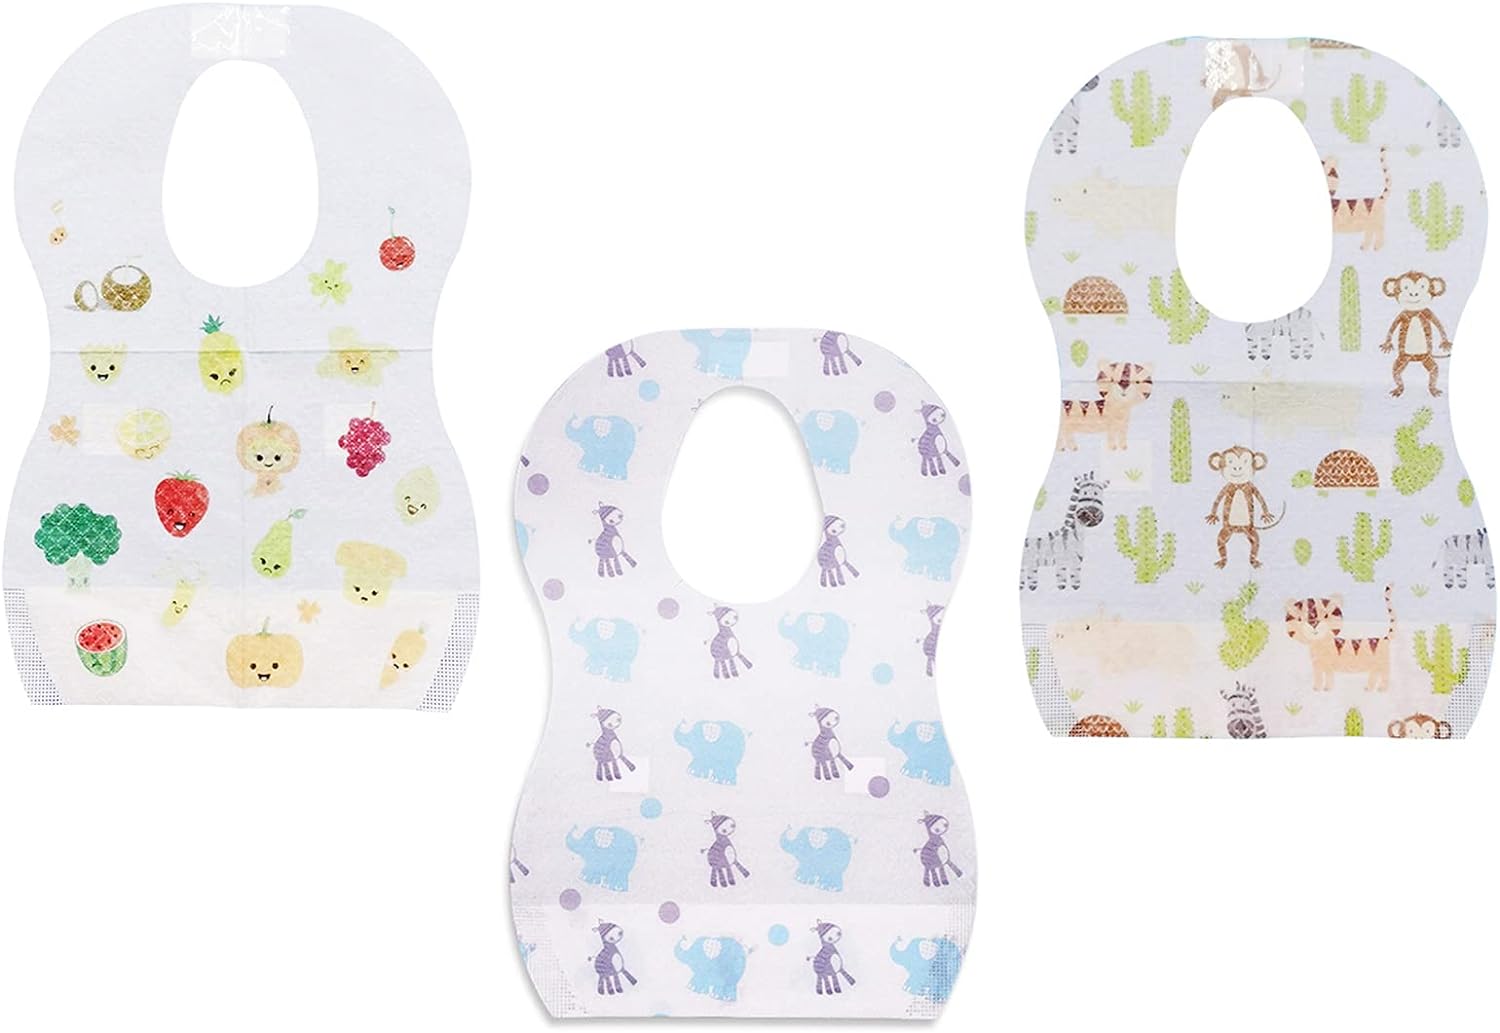 Star Babies Disposable Bibs Pack of 30, Pack of 1